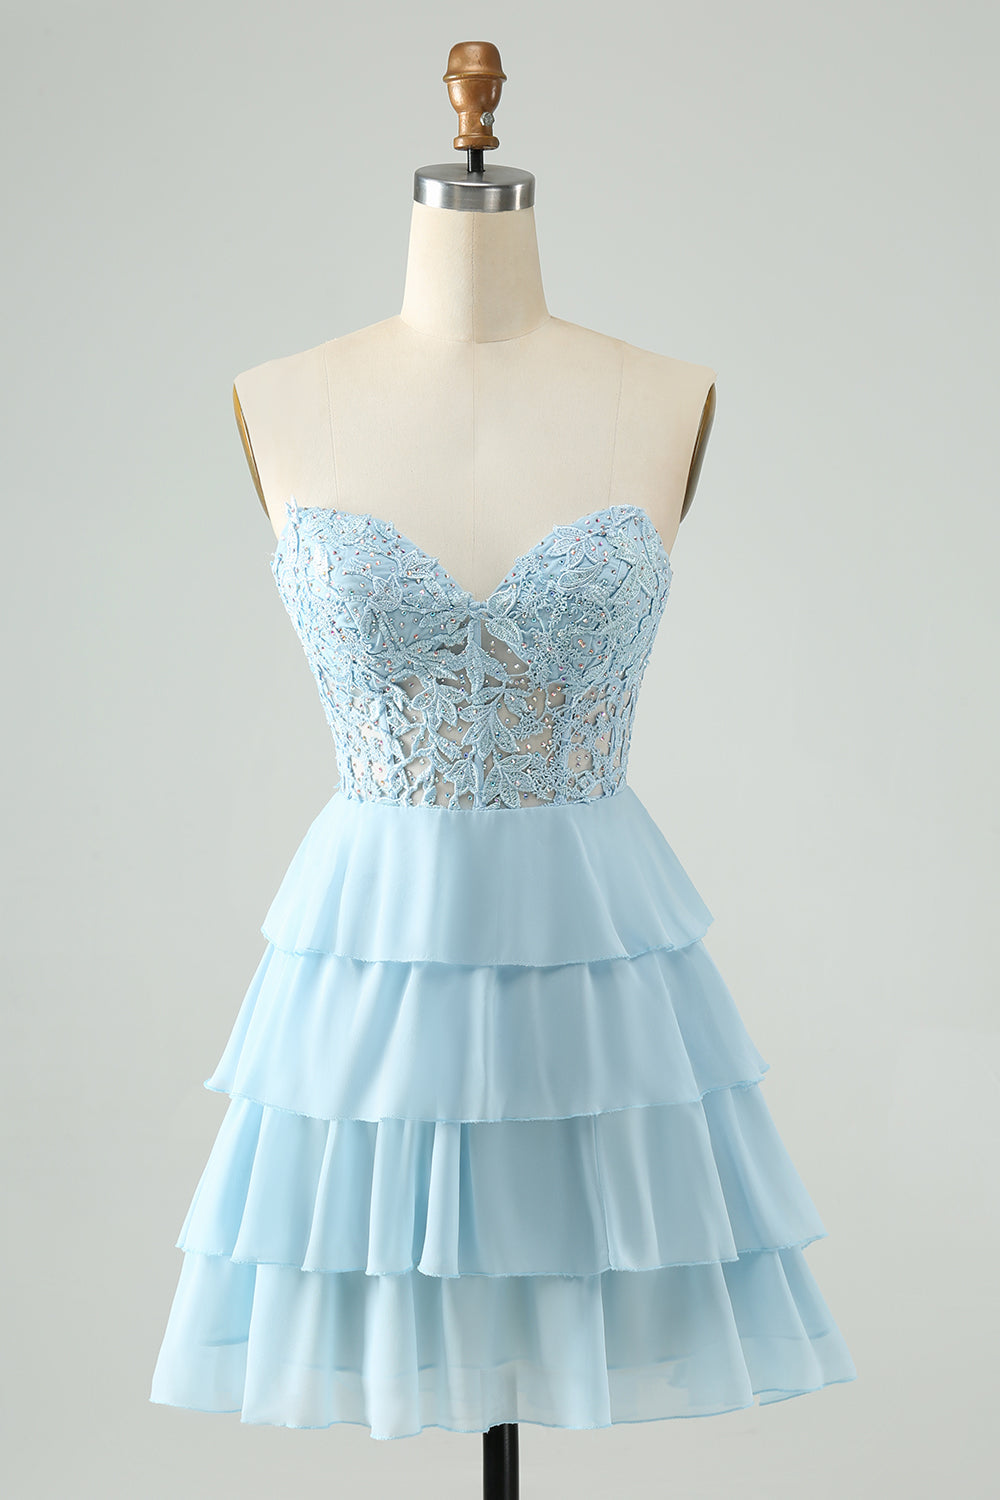 Light Blue A Line Sweetheart Tiered Cocktail Dress with Appliques